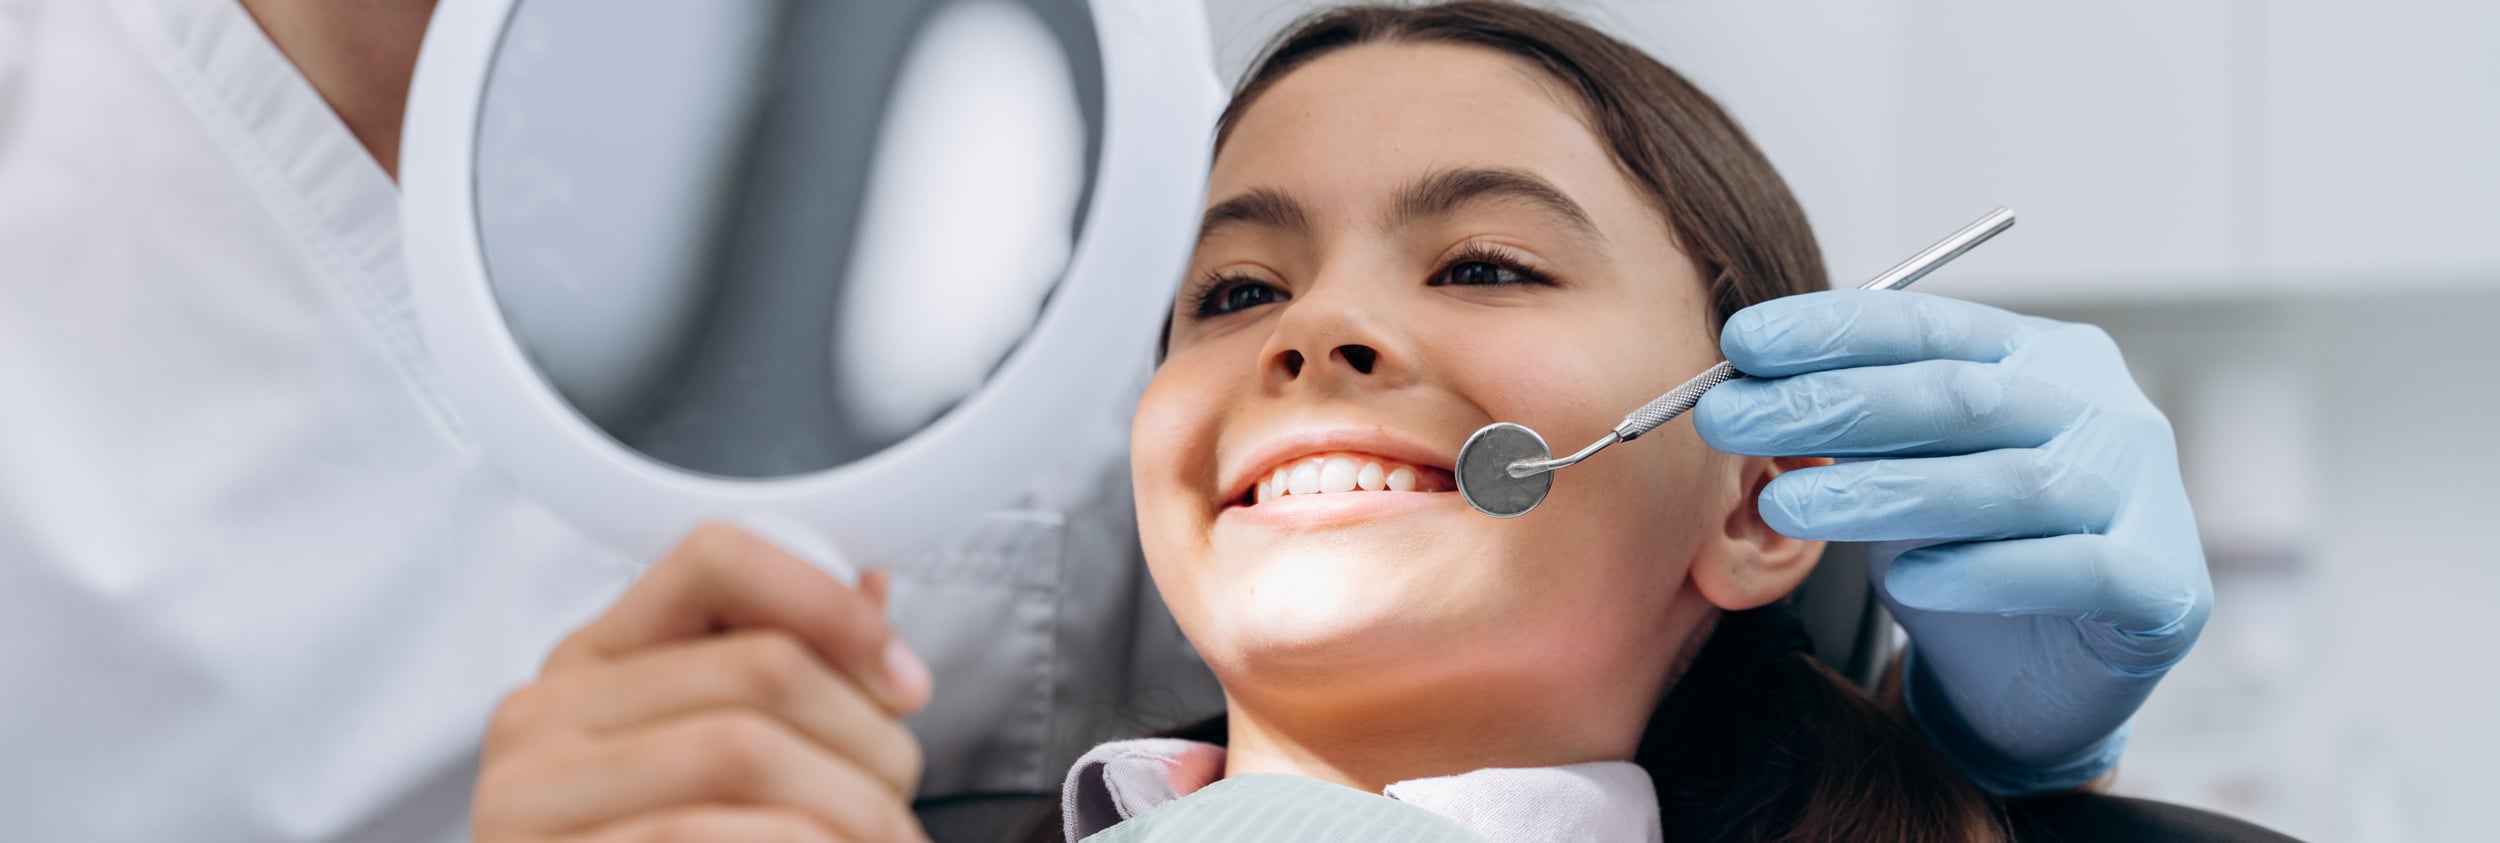 A young girl smiles at herself in a hand held mirror at odonto dental